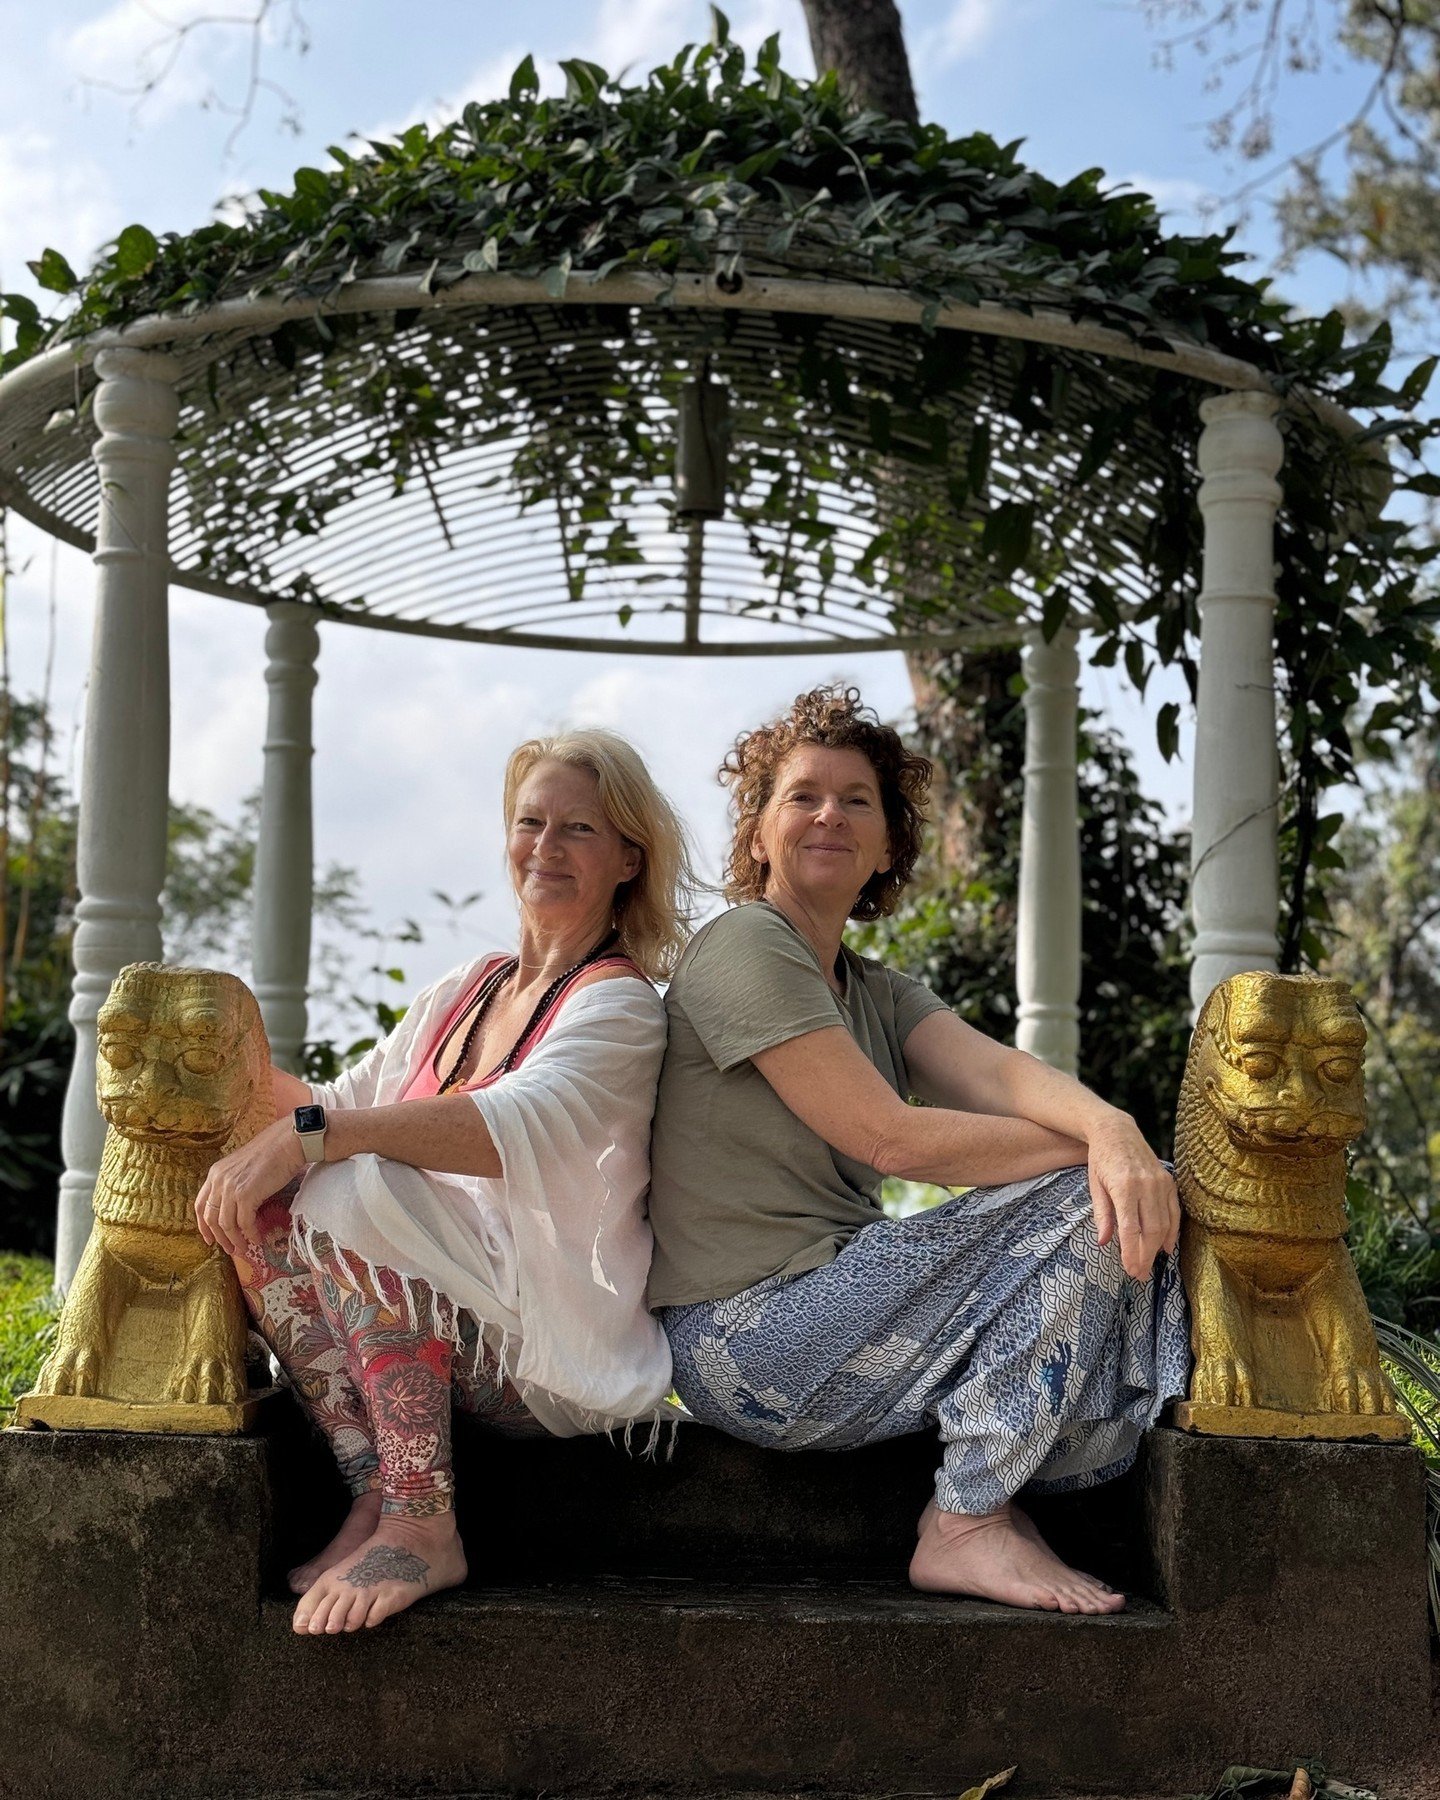 💛🇱🇰🌿 Exciting times incoming.
My lovely friend from &lsquo;down-under&rsquo; @justinethompsonyoga and I are getting ready to launch our wonderful 7 day yoga retreat in the lush mountains of Sri Lanka next February.

We had the best time with 14 f